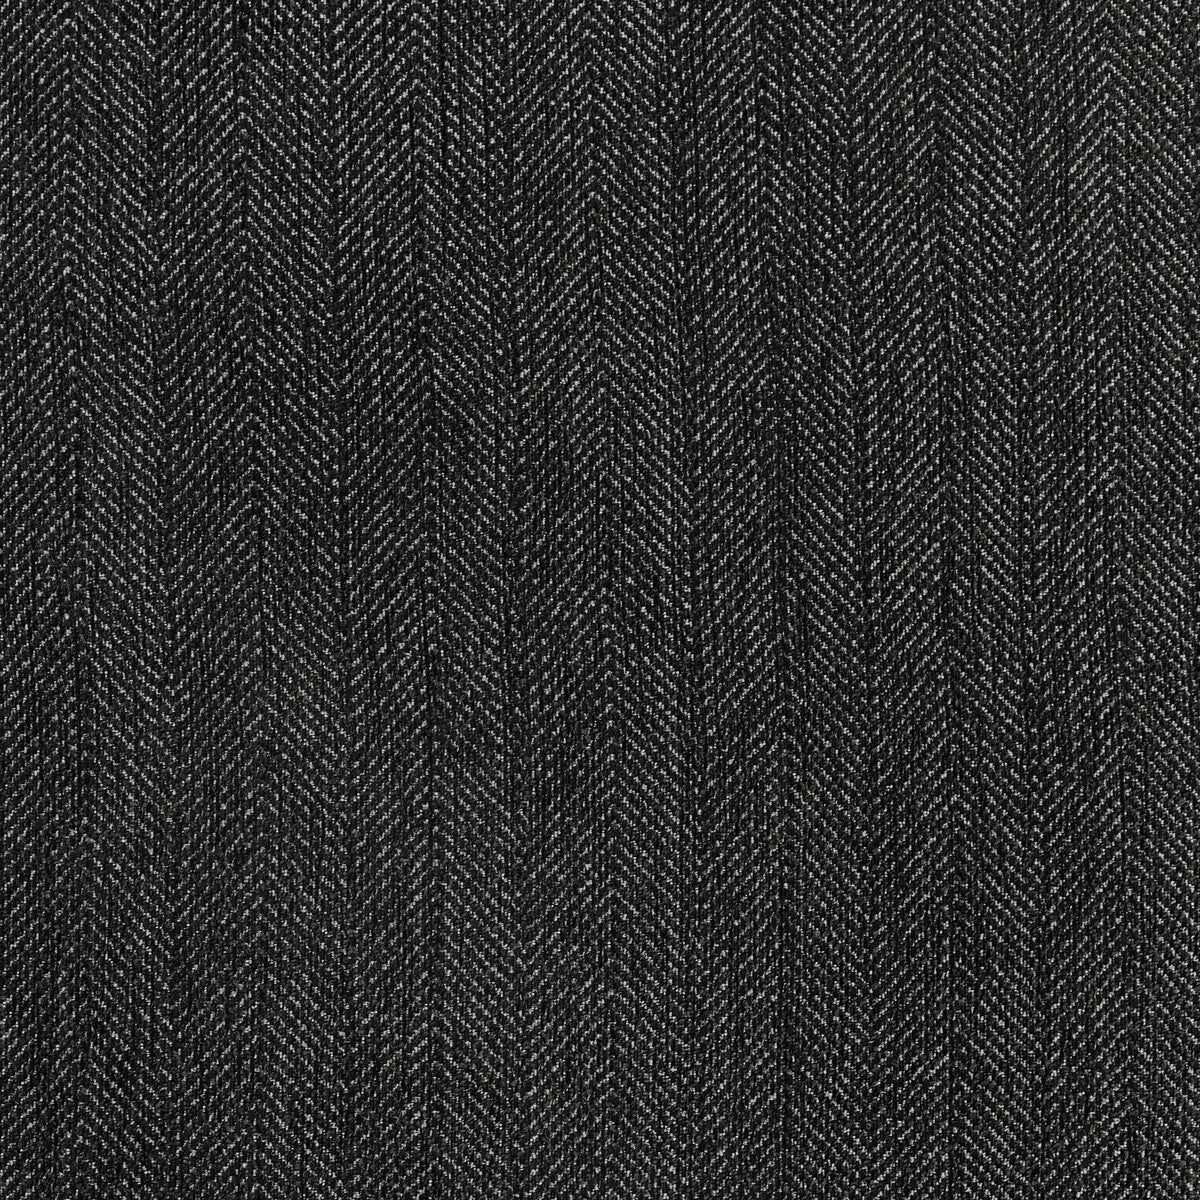 Healing Touch fabric in black tie color - pattern 36389.8.0 - by Kravet Design in the Crypton Home - Celliant collection